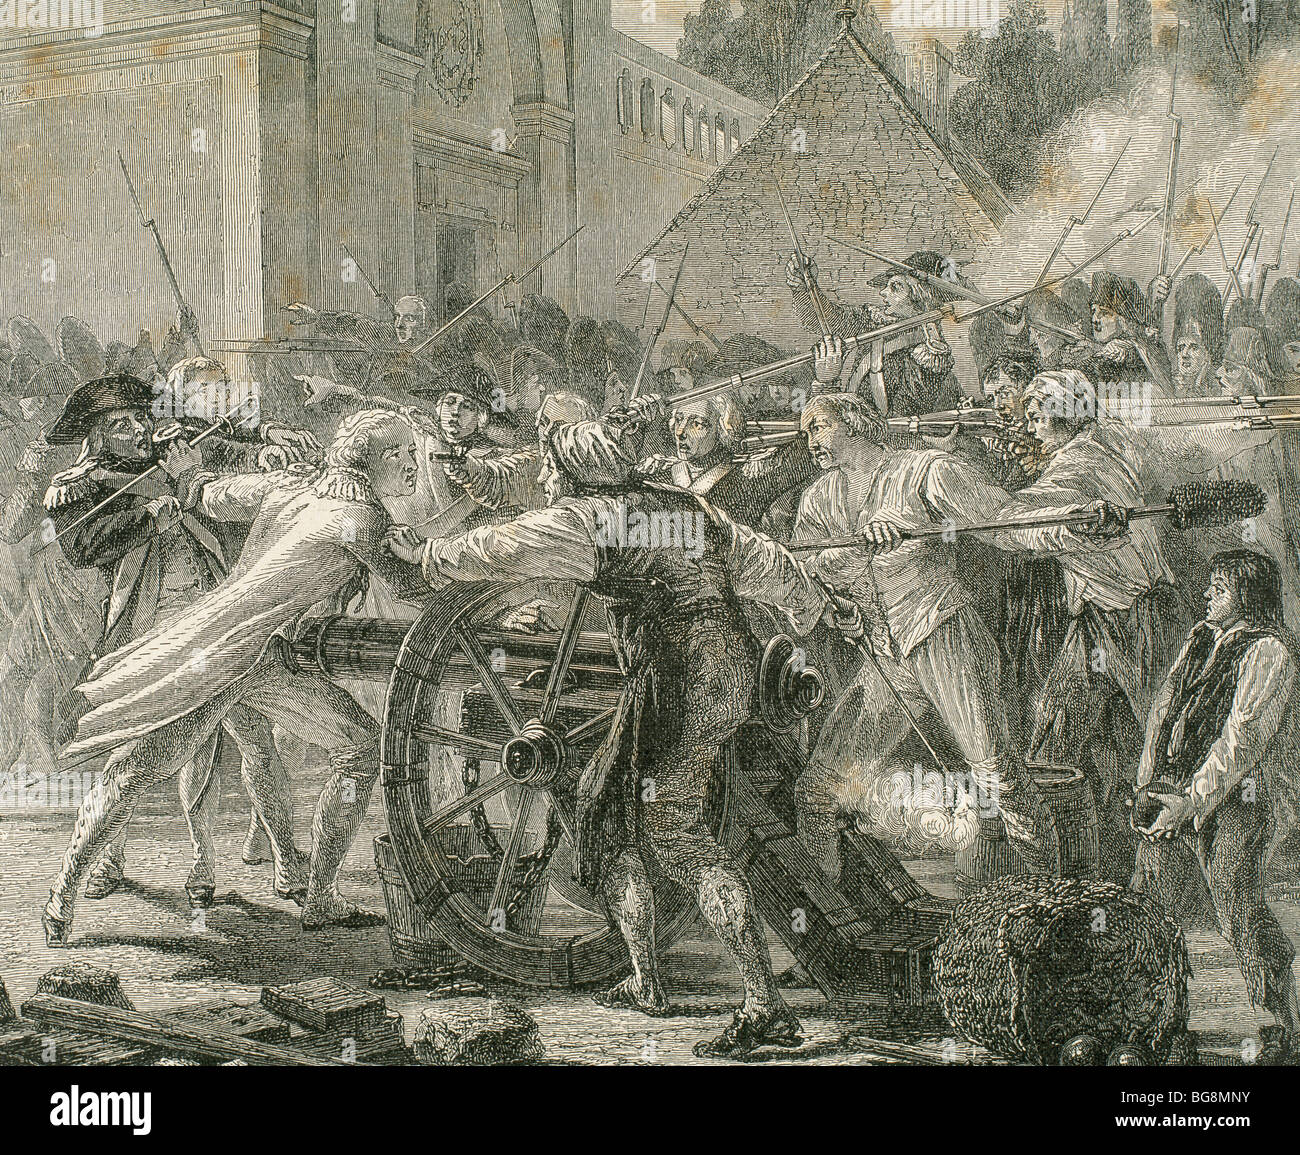 FRENCH REVOLUTION. Heroic act of Desilles. Engraving by T. Meyer Heine. Stock Photo